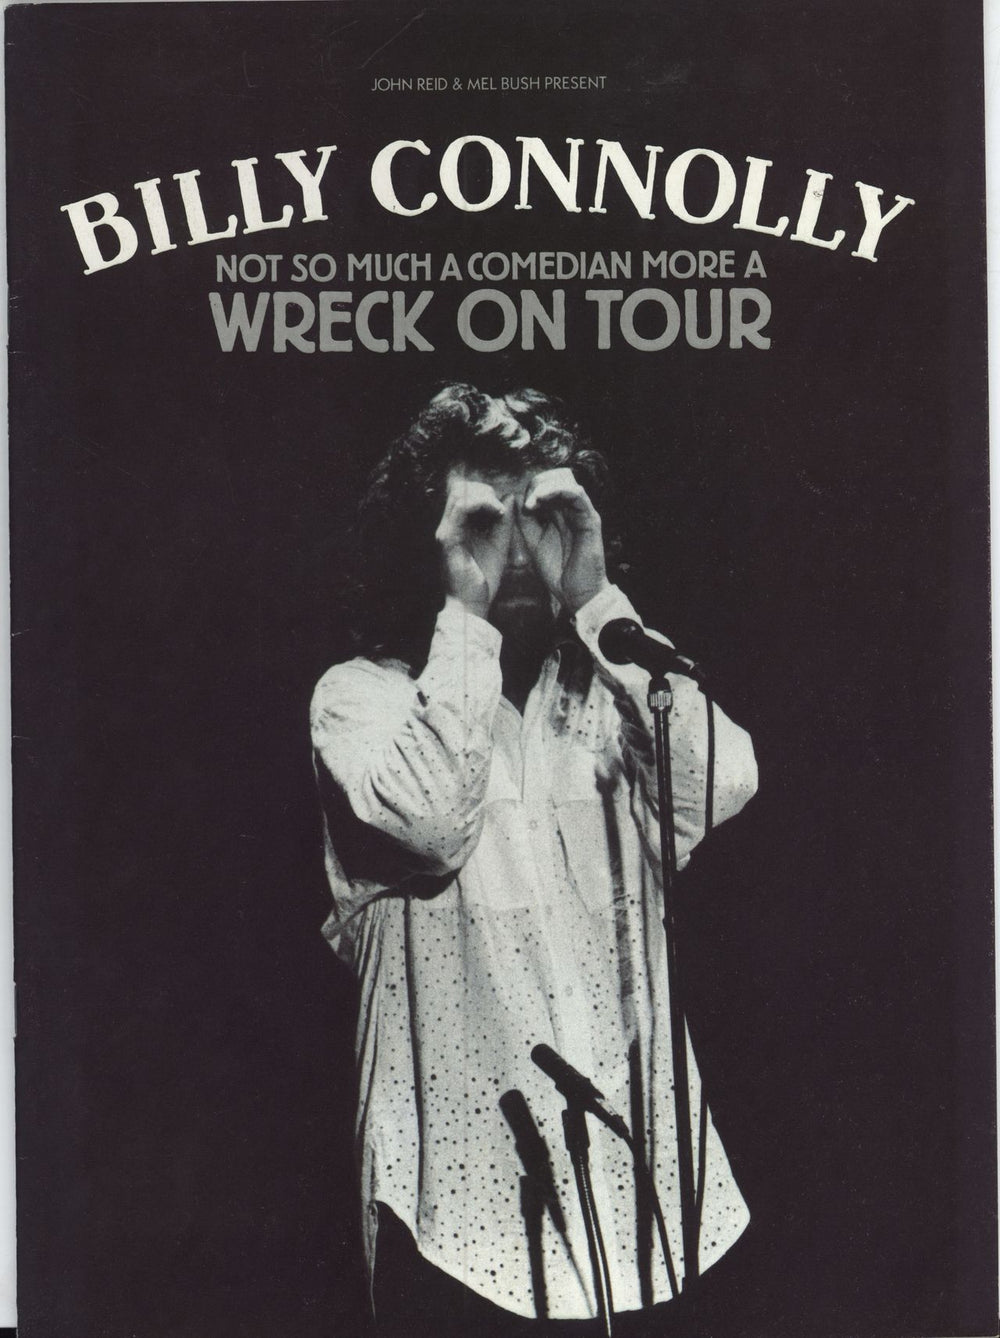 Billy Connolly Not So Much A Comedian More A Wreck On Tour + ticket stub UK tour programme TOUR PROGRAMME